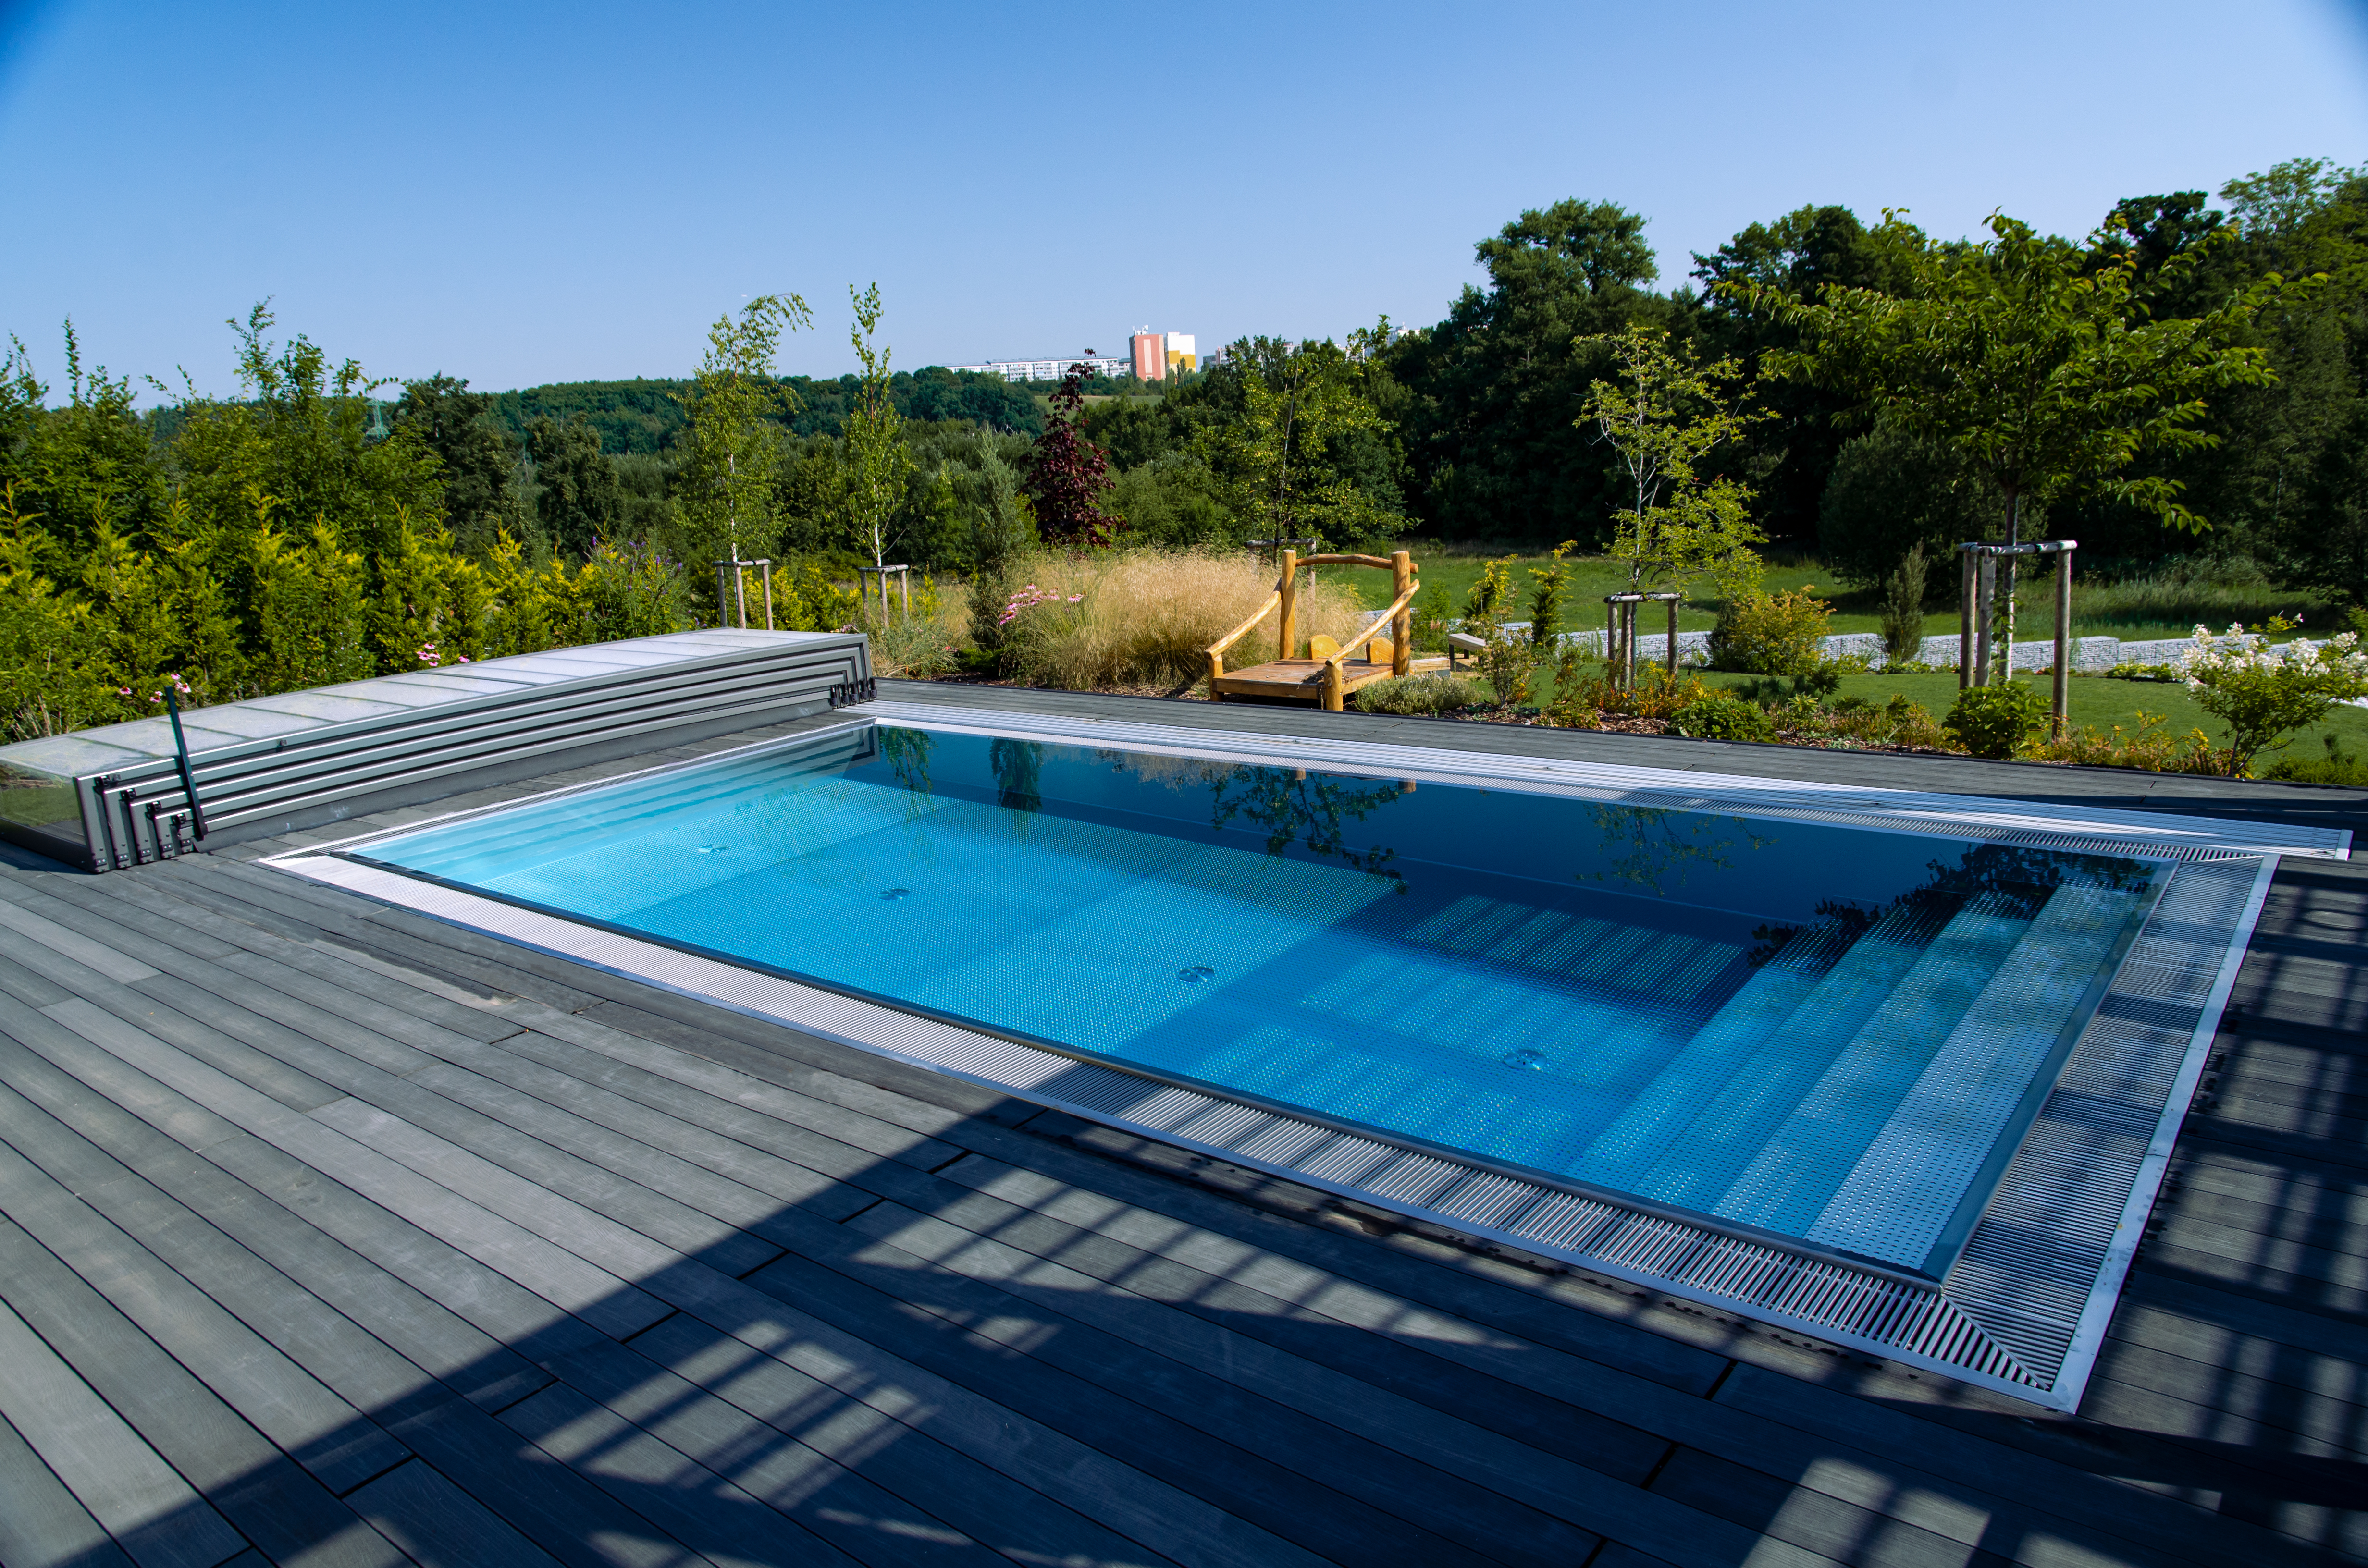 IMAGINOX pool with sliding cover